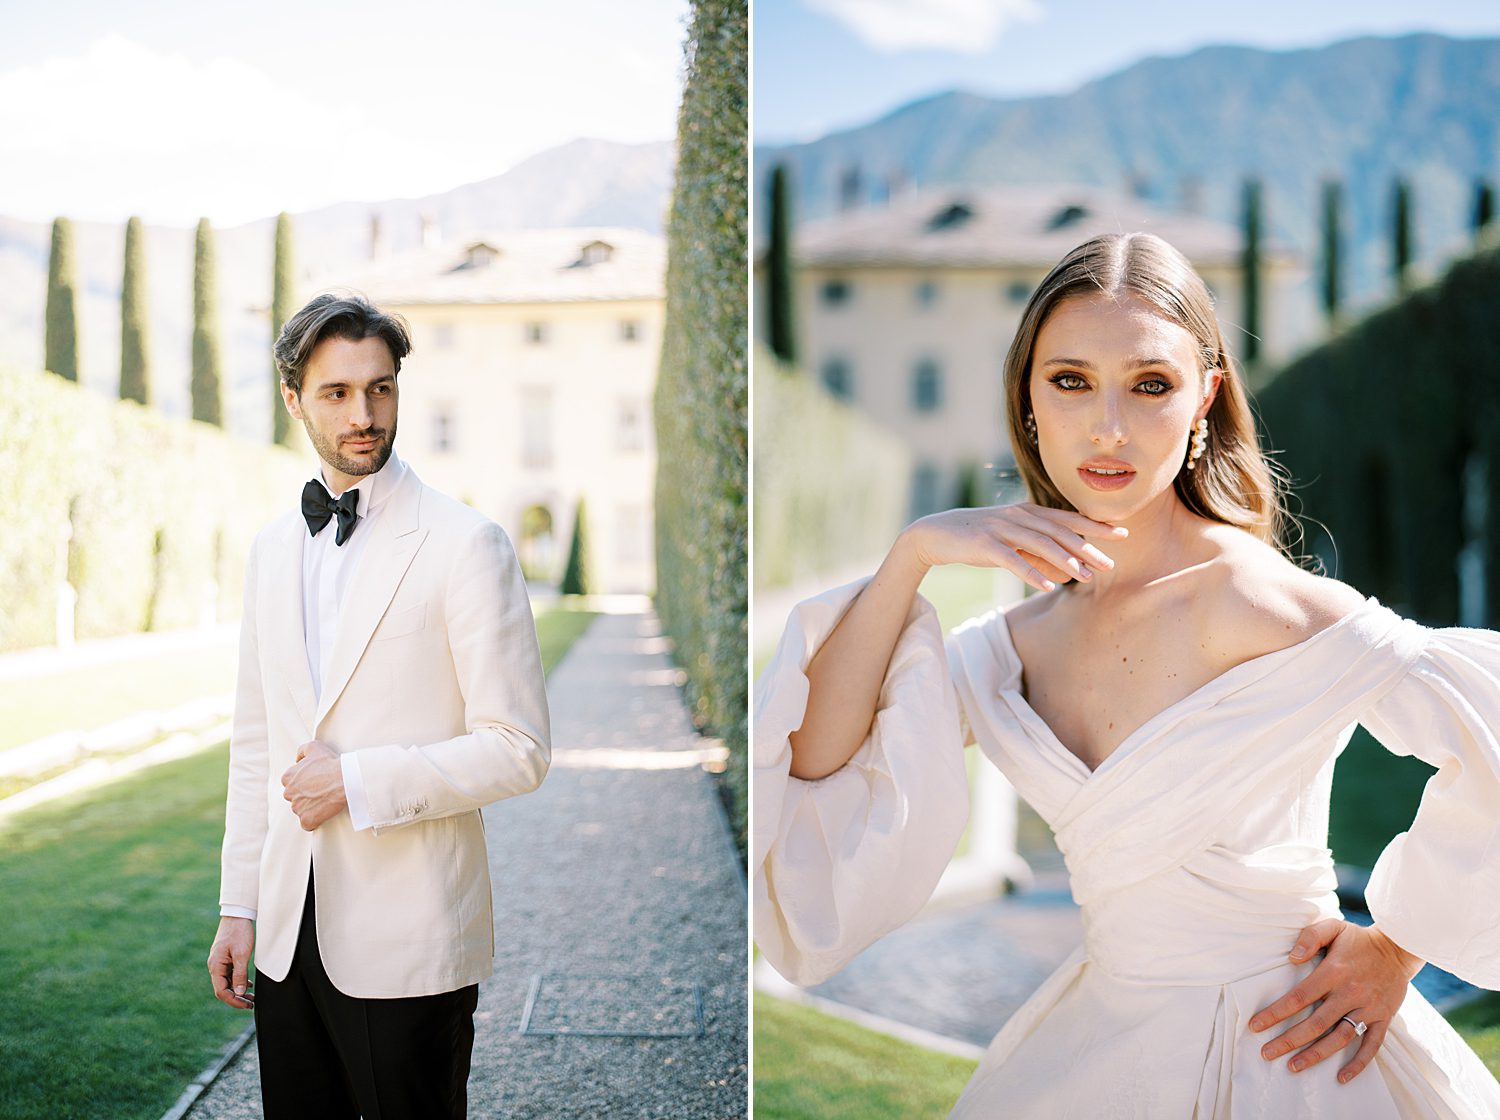 groom in white jacket with black lapels and bride in wedding gown designed by Ines Di Santo